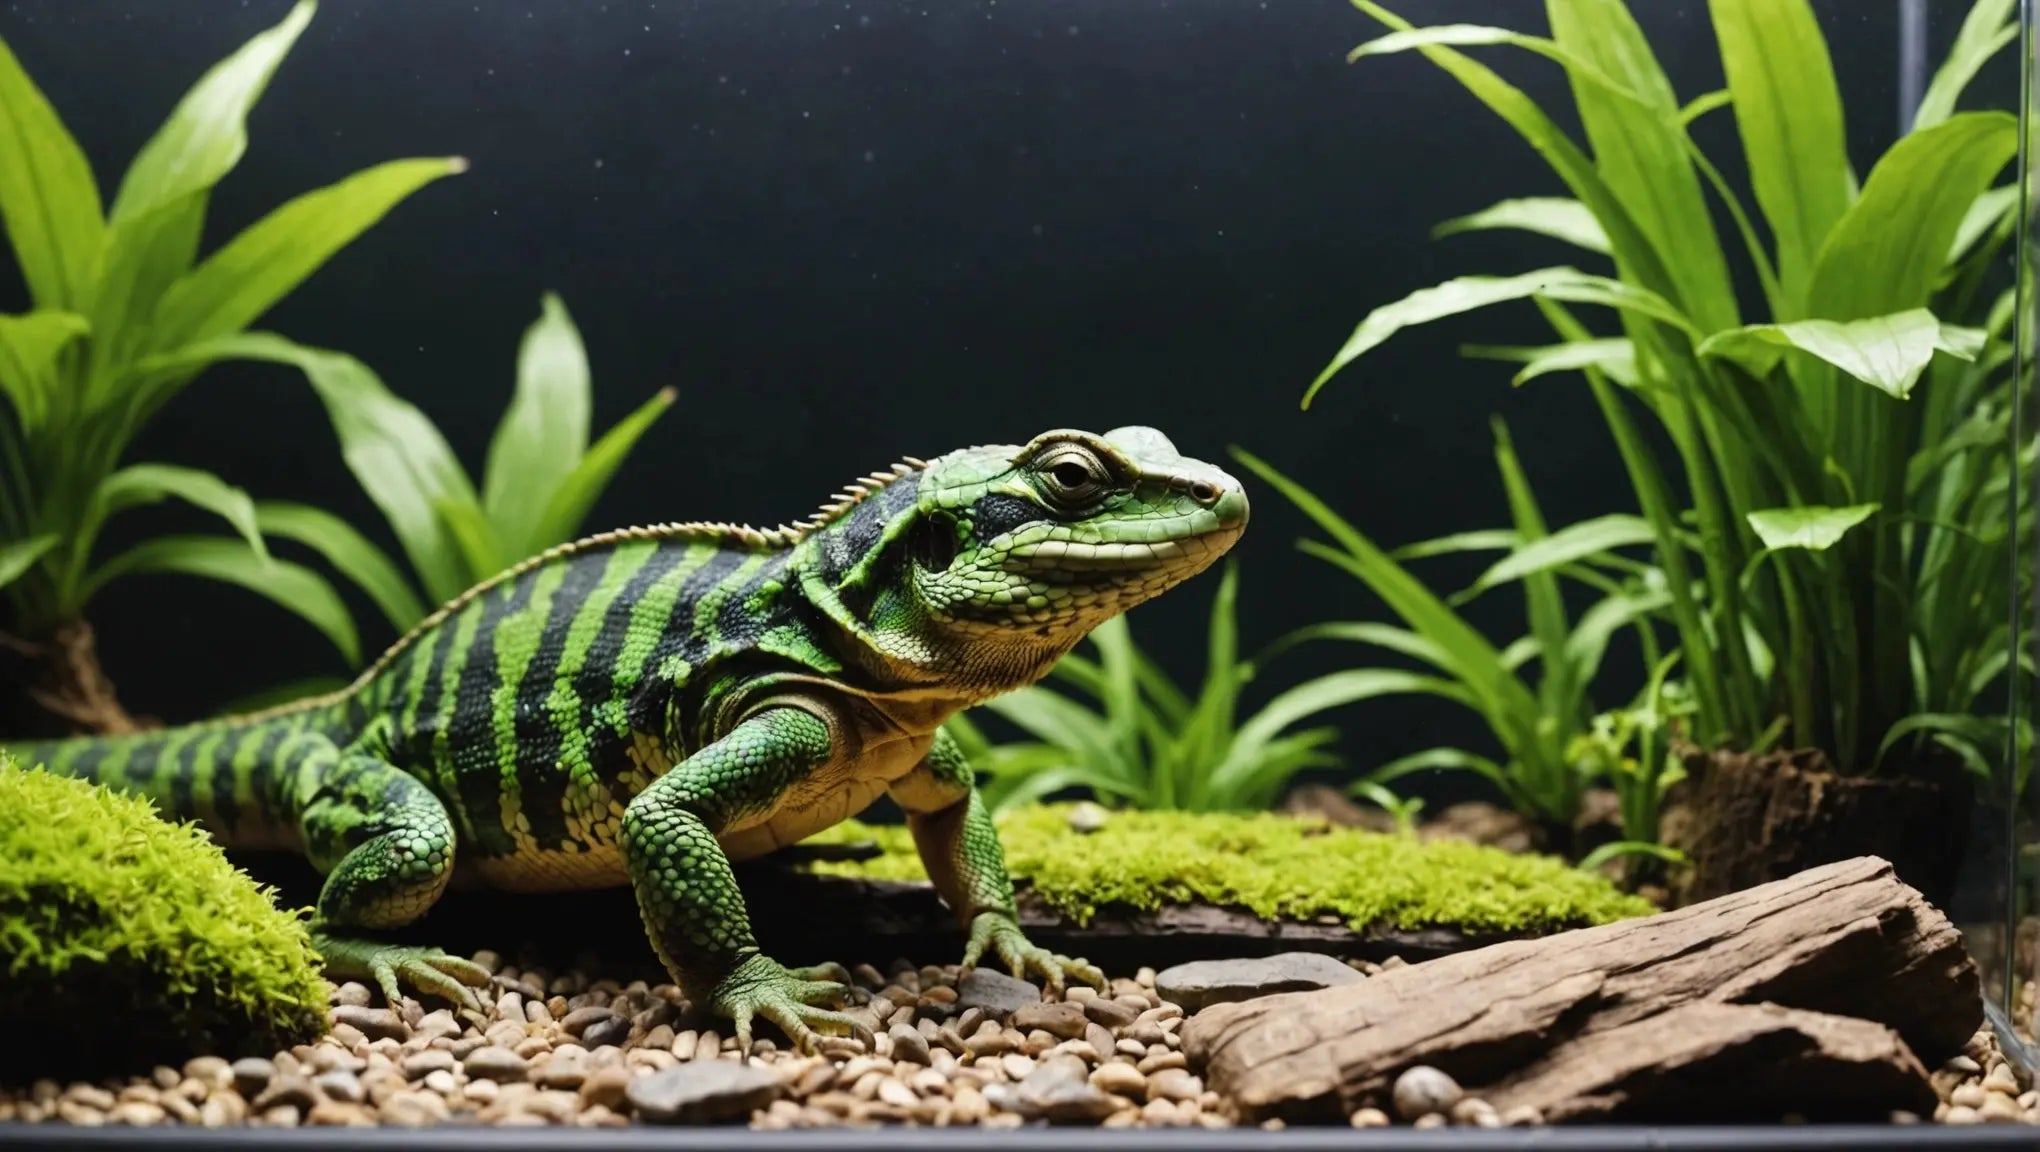 Add Style to Your Reptile's Habitat with Quality Fixtures